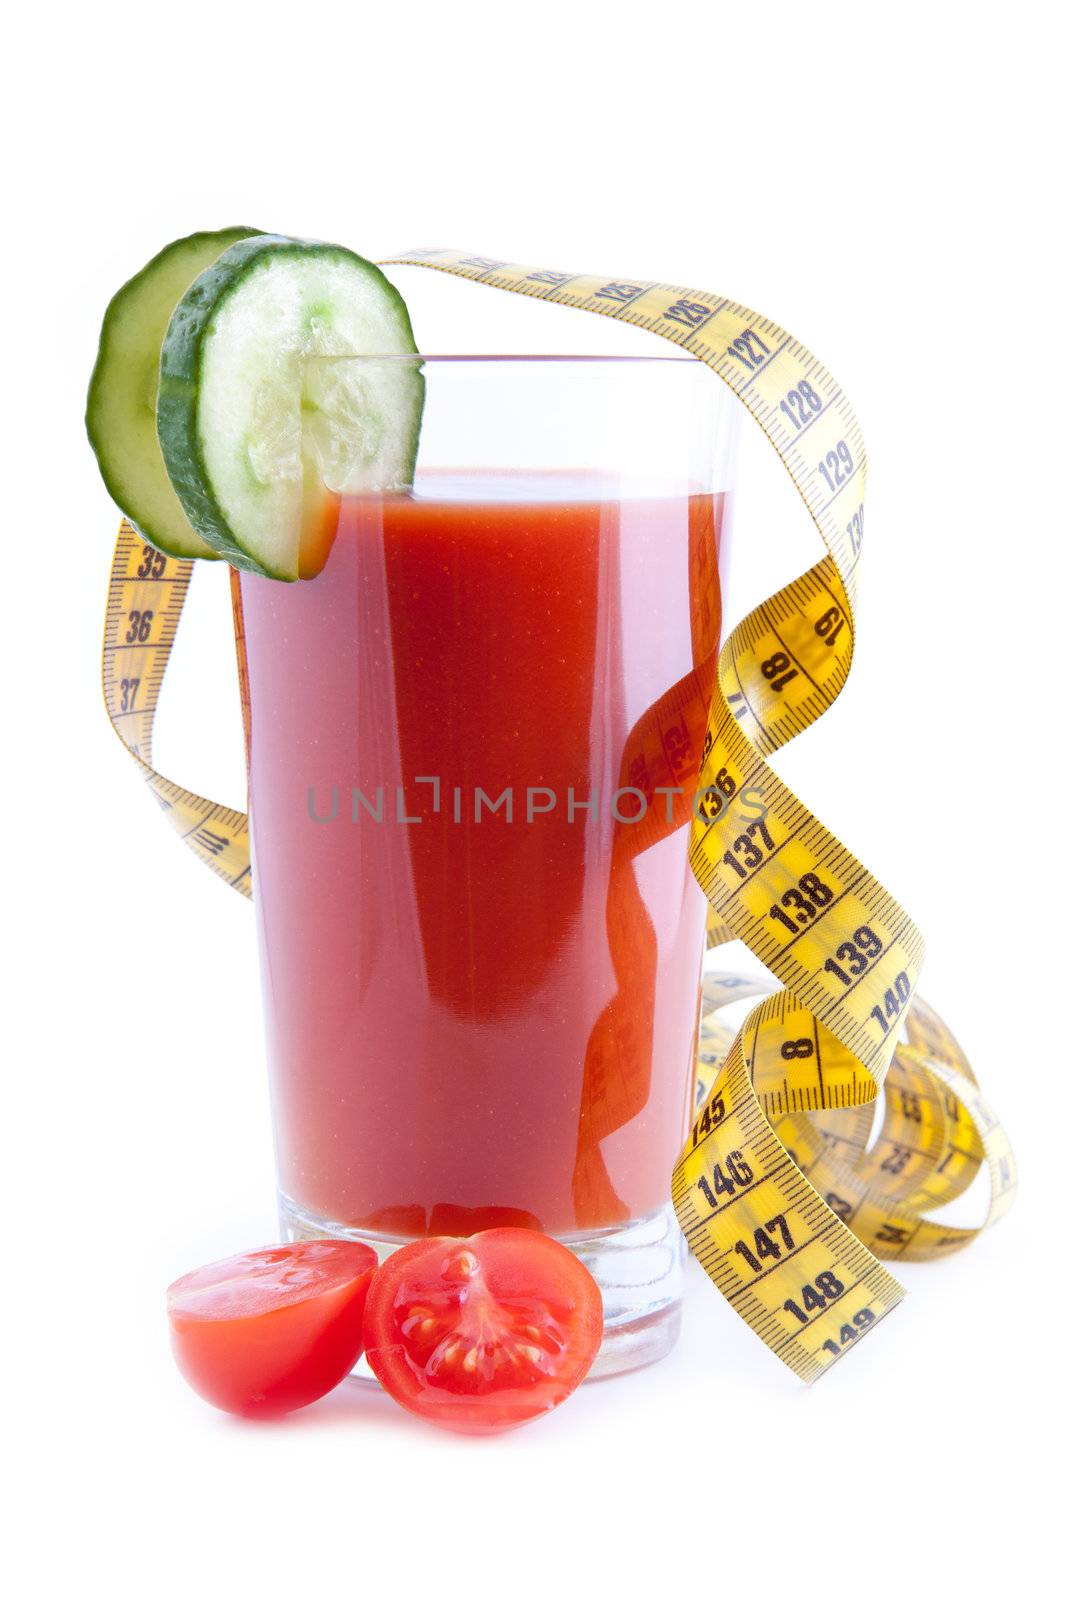 Tomato juice with cucumber slices, fitness tape